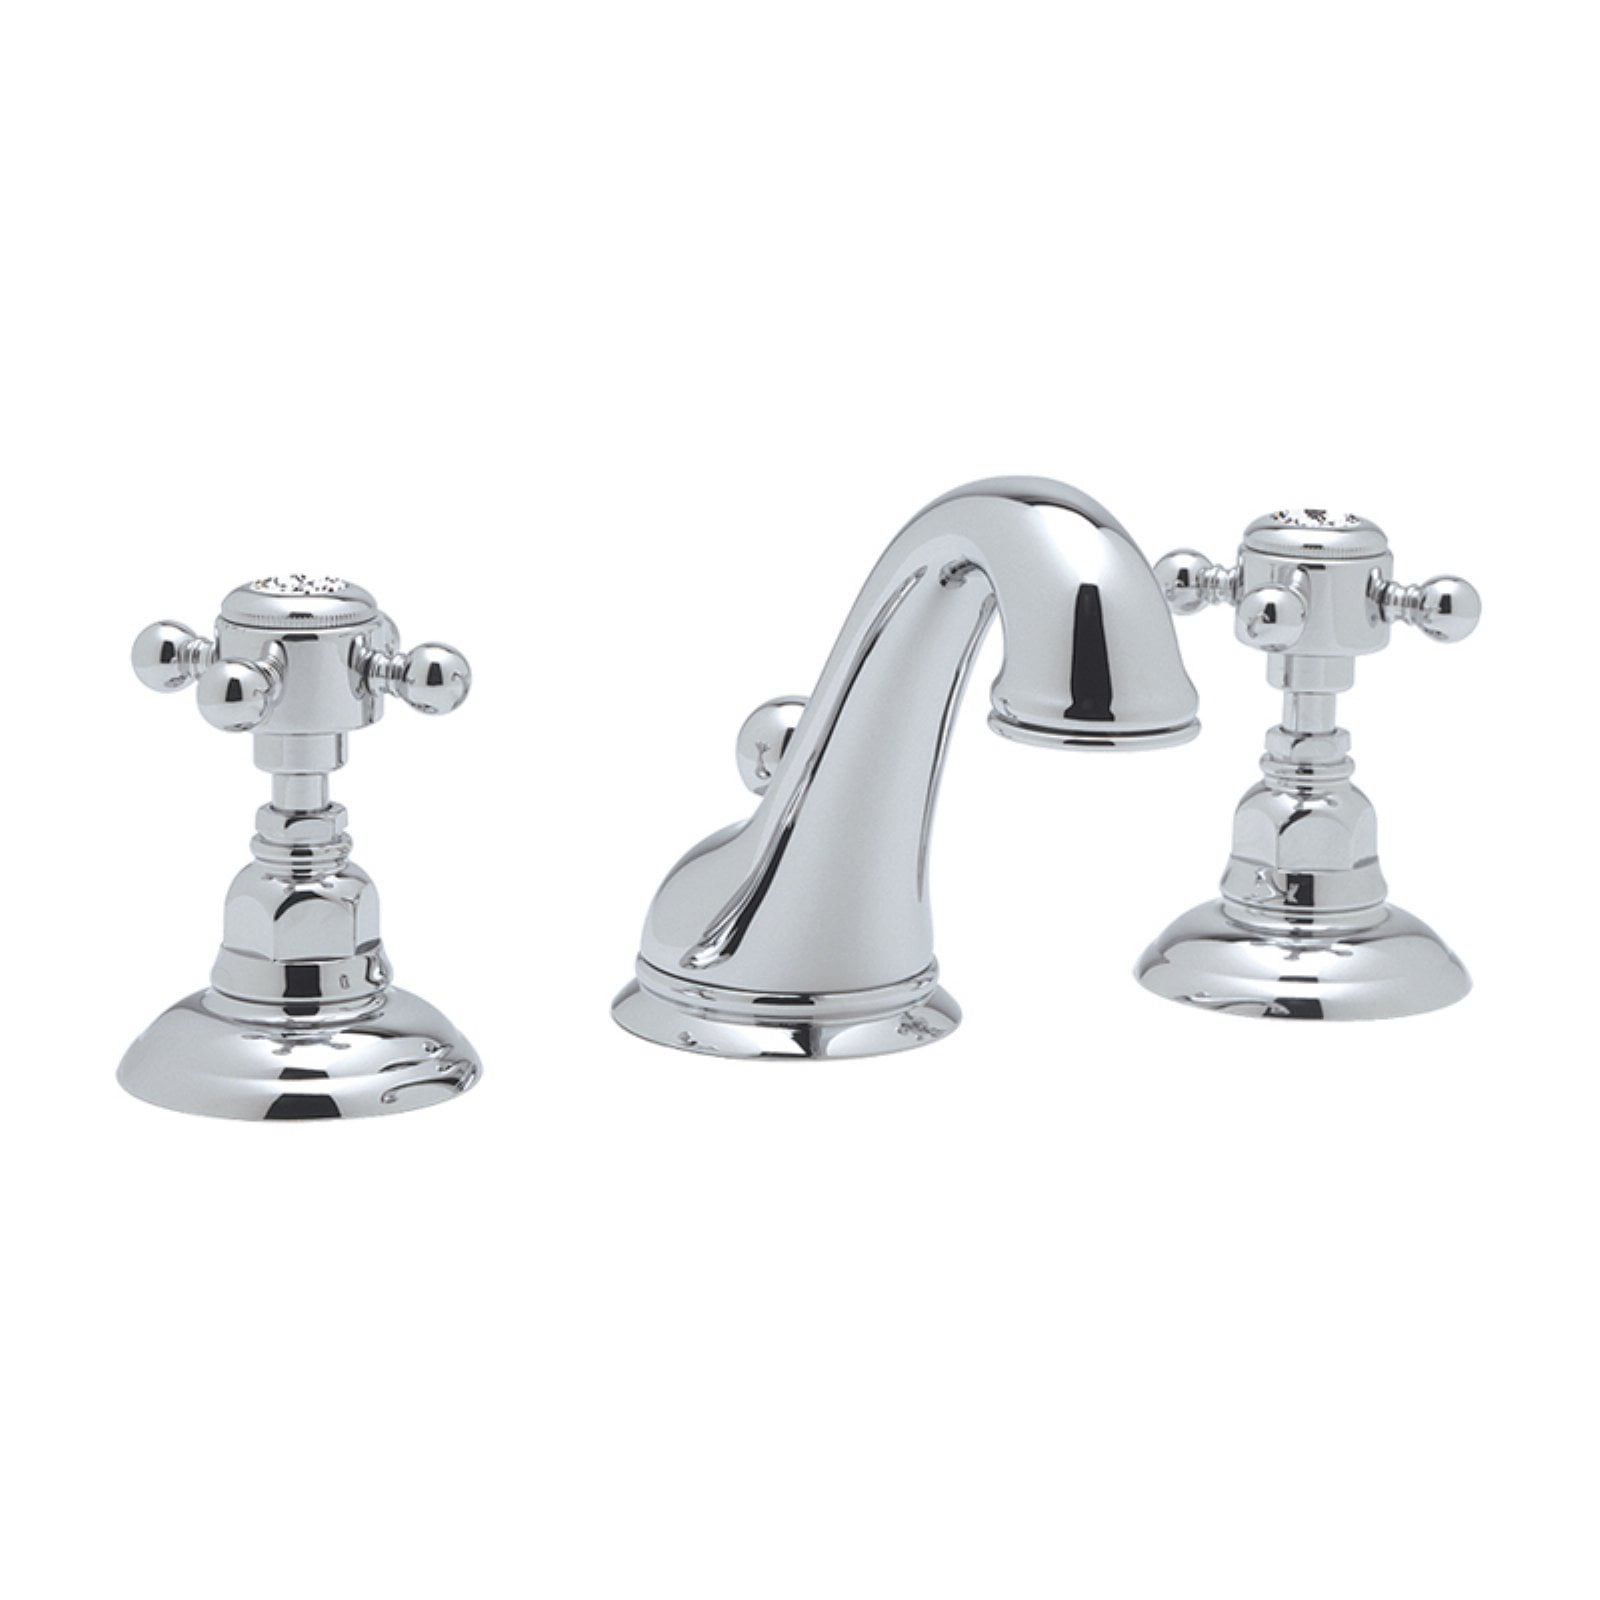 Rohl A1884XCAPC Country Bath Tub Filler Faucet with Swarovski Crystal Cross  Handles, Polished Chrome キッチン